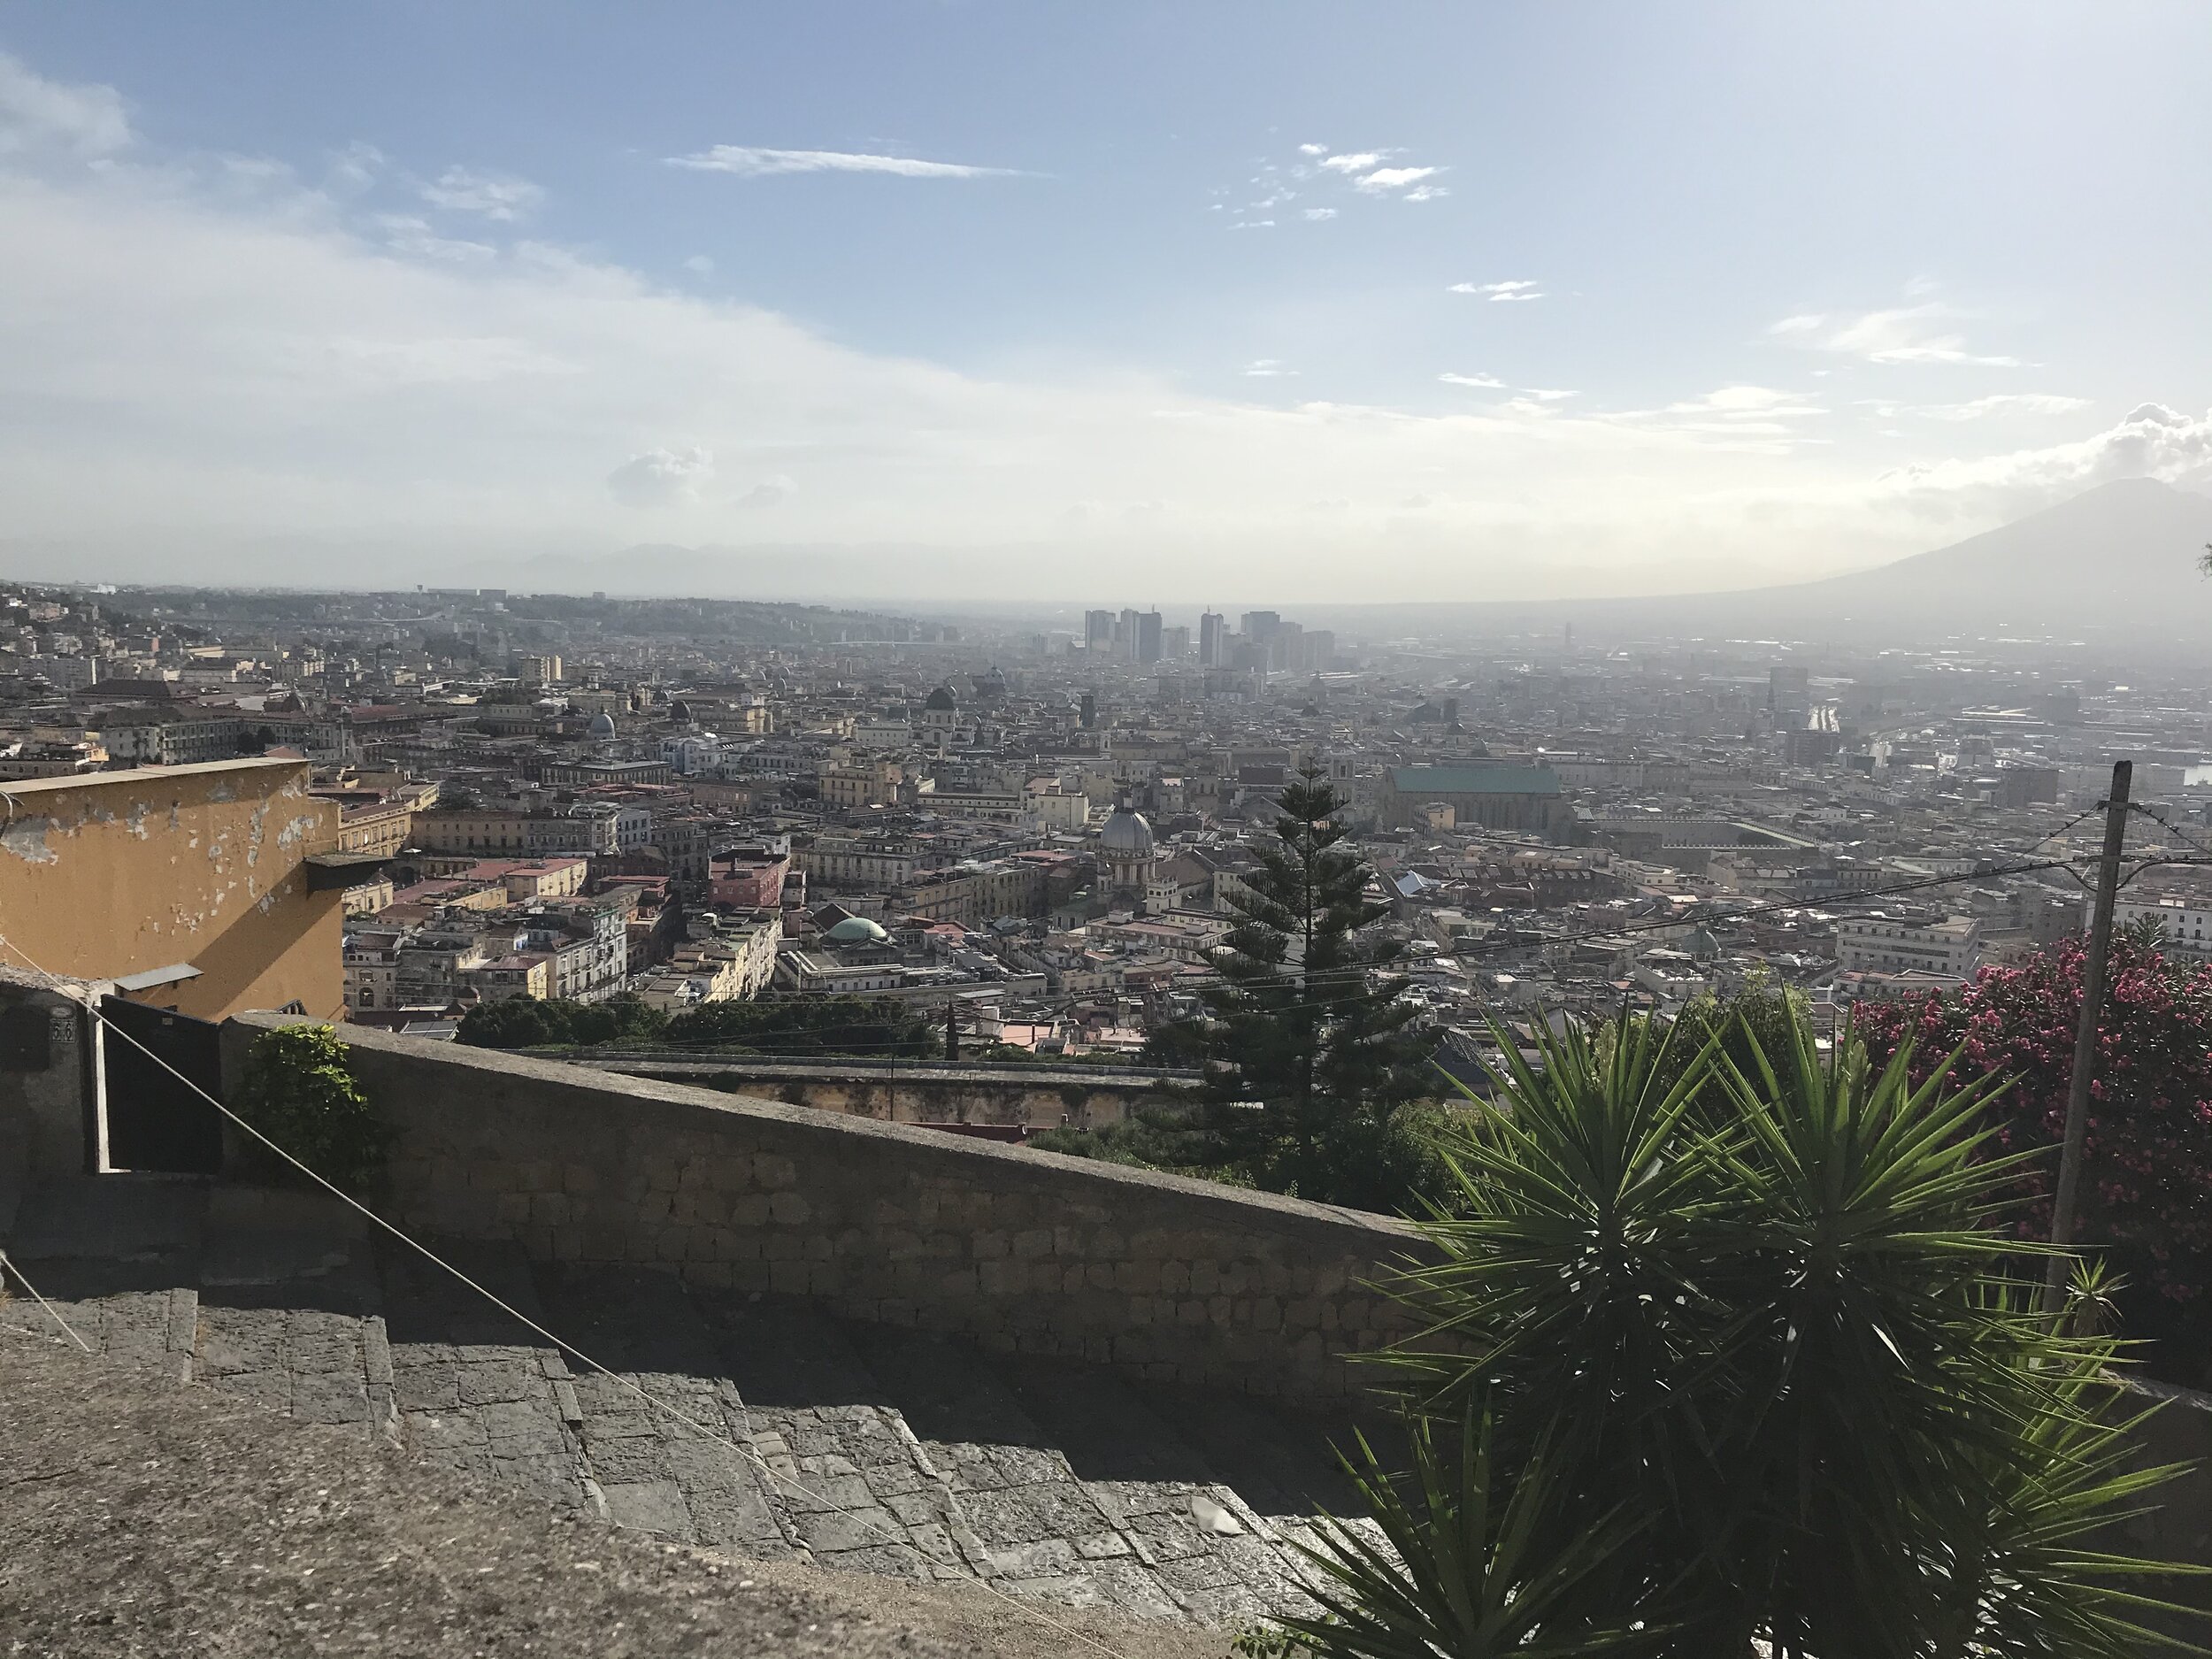   NAPLES, Italy: August 7th, 2020. PICTURED:  View from the Panoramic Stairways, a medieval step commuter path which descends down into the city from Monastery of San Martino and Castel Sant’Elmo. 